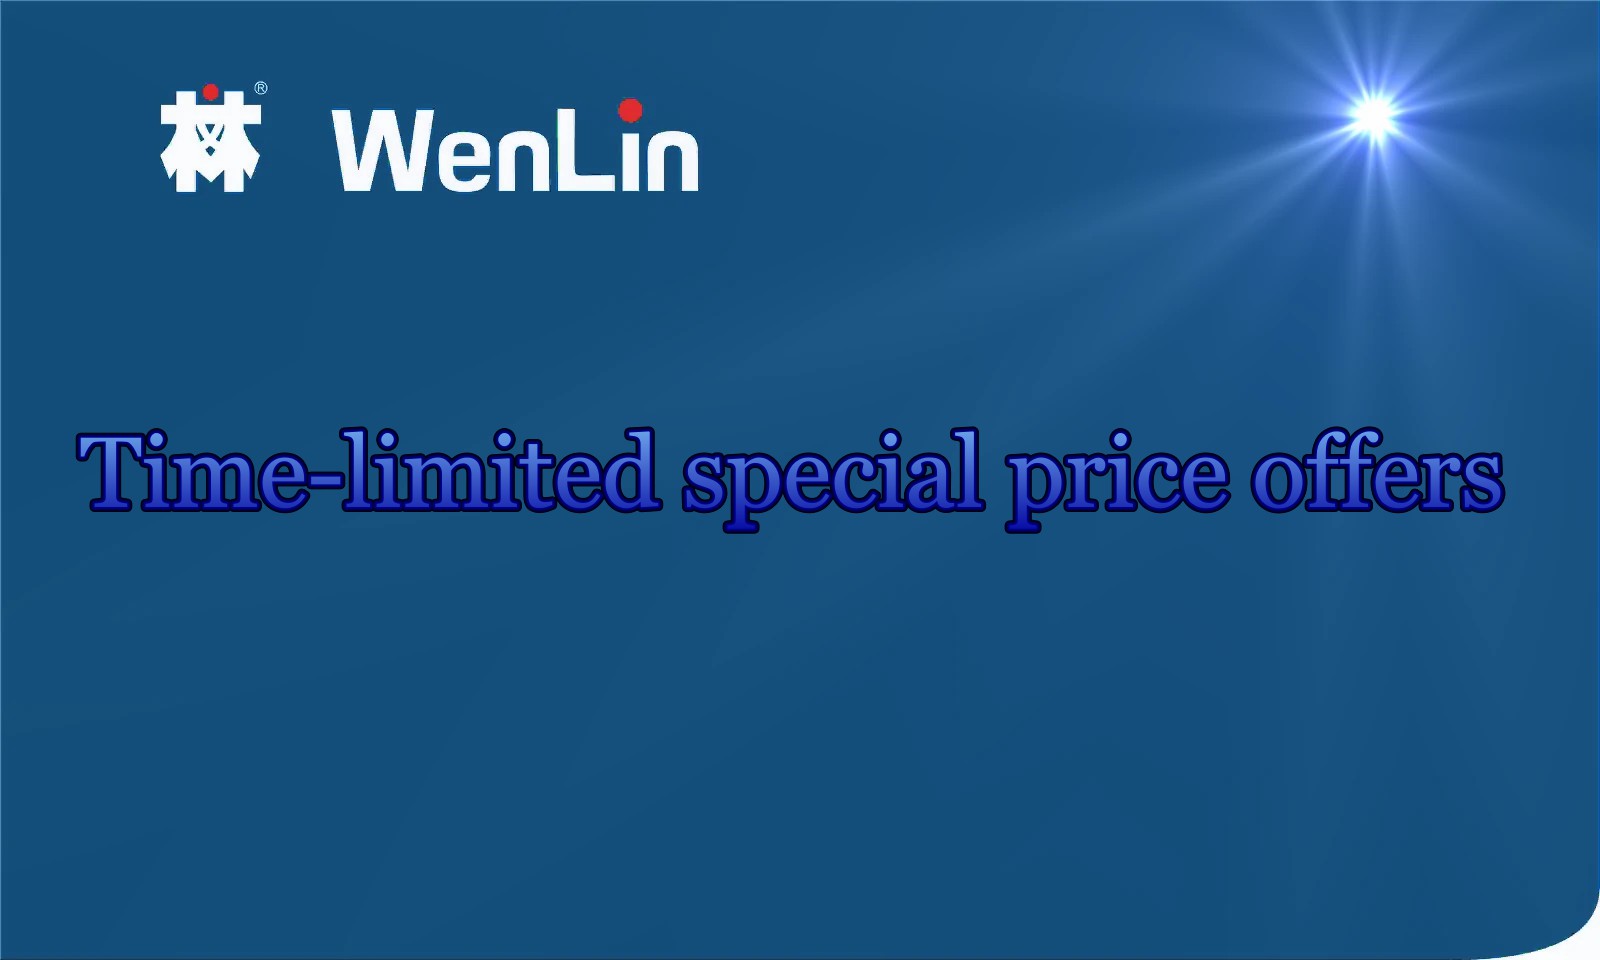 Wuhan Wenlin Technology Co.,Ltd launched time-limited special price offers for laminator and punching machine